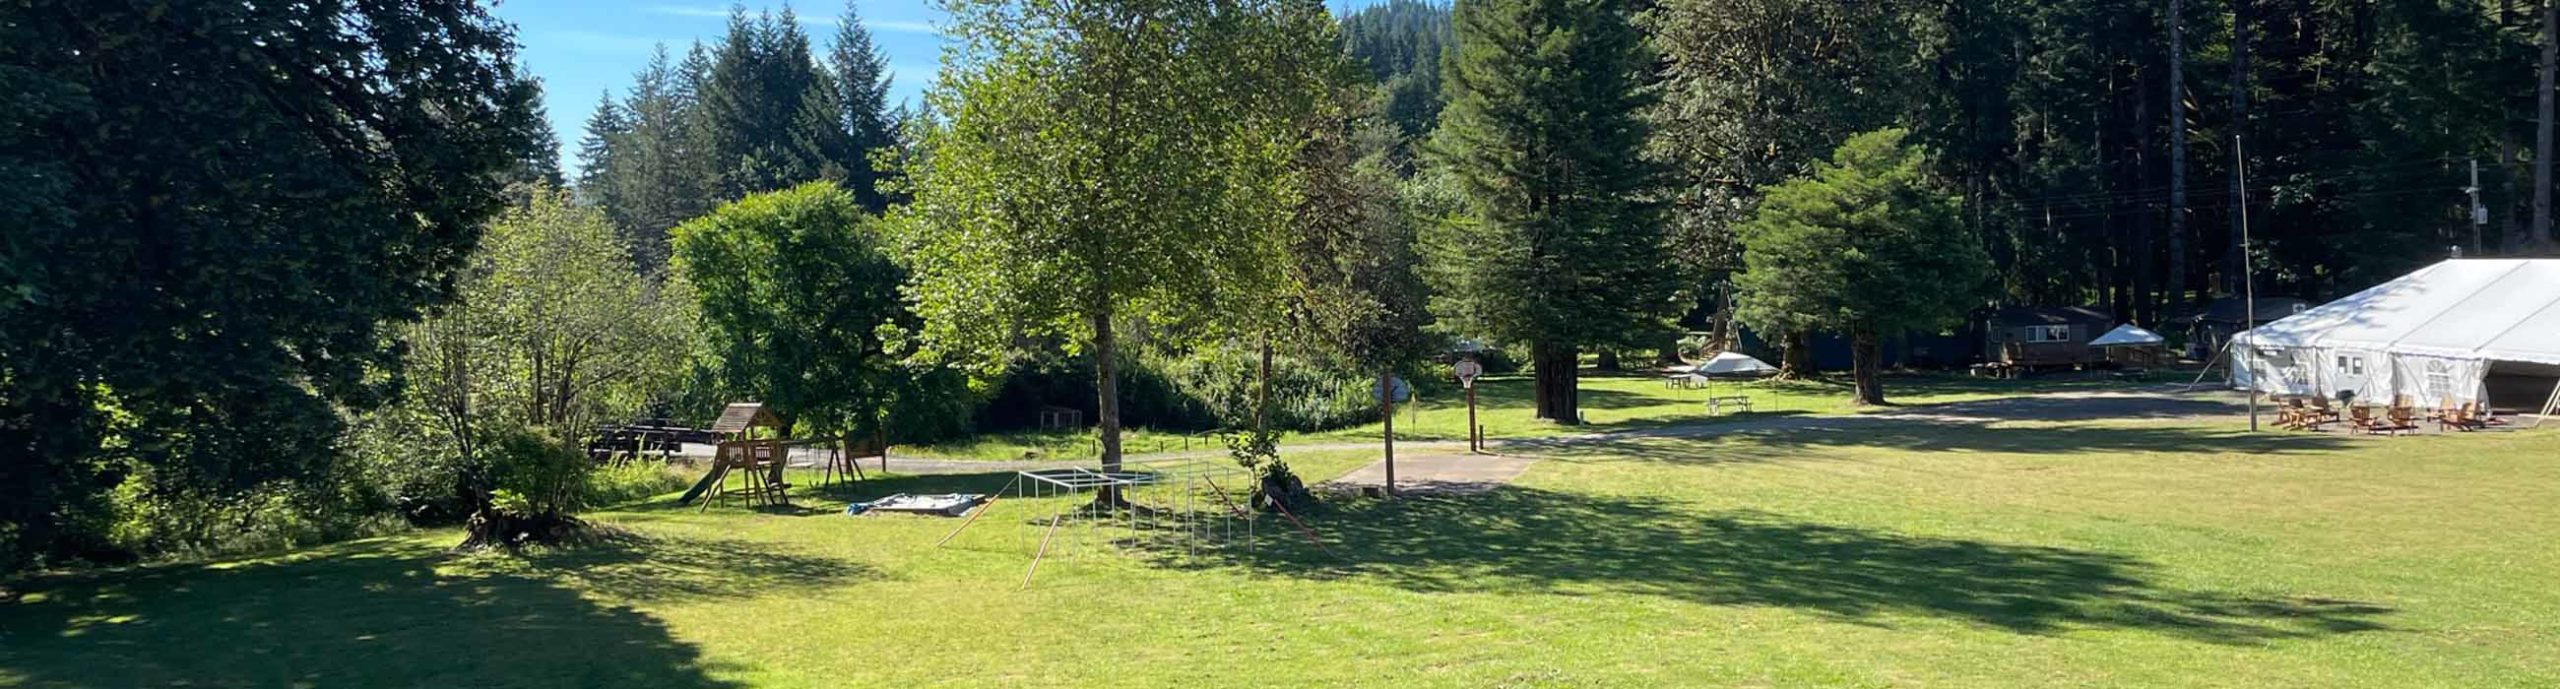 The front field at Camp Lutherwood Oregon seen from the top of the climbing wall looking toward the basketball court